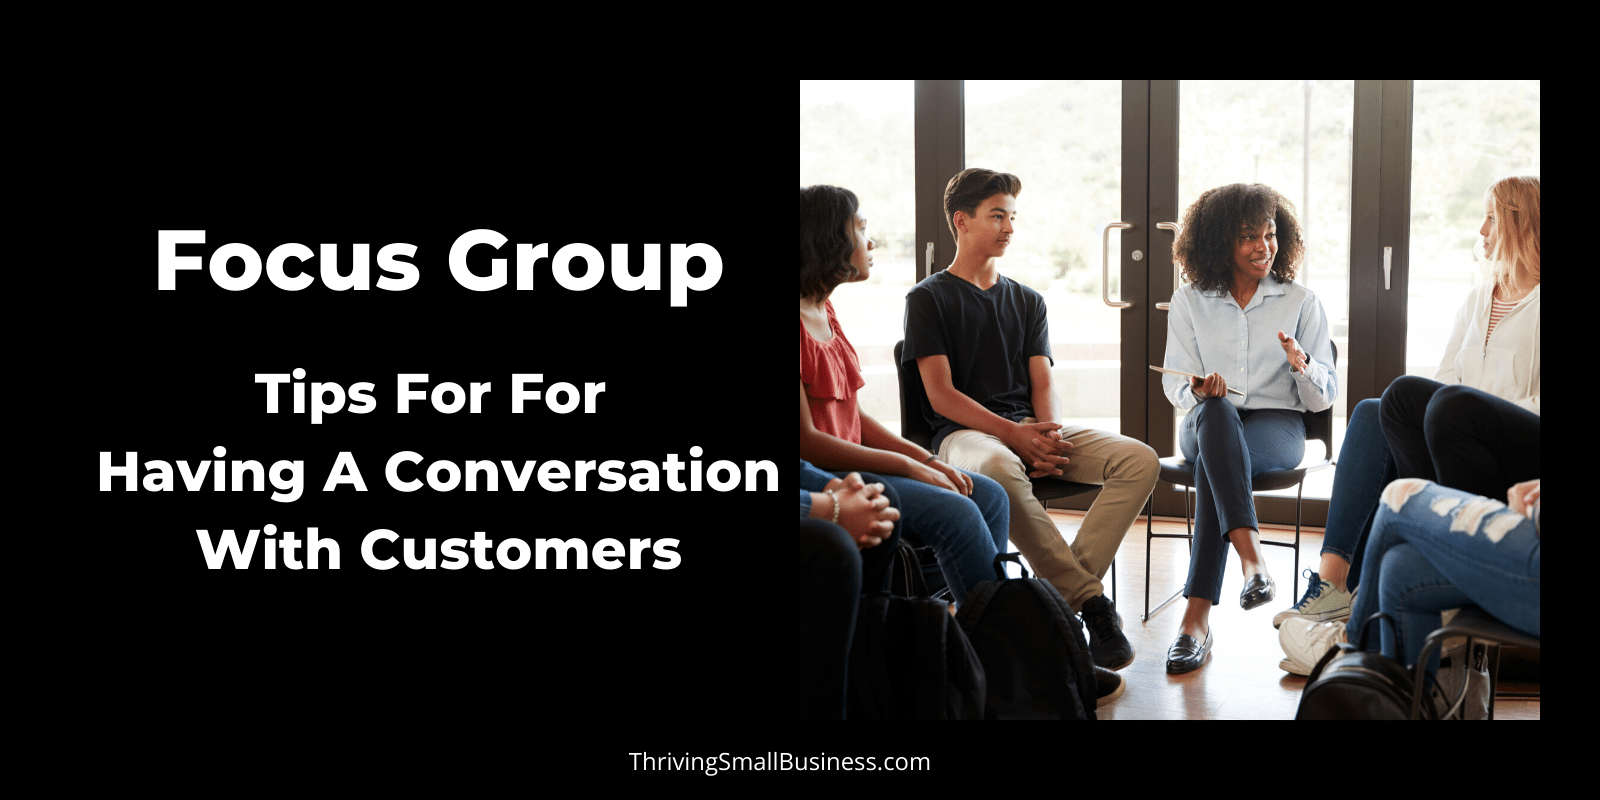 What are the advantage of focus group interviews